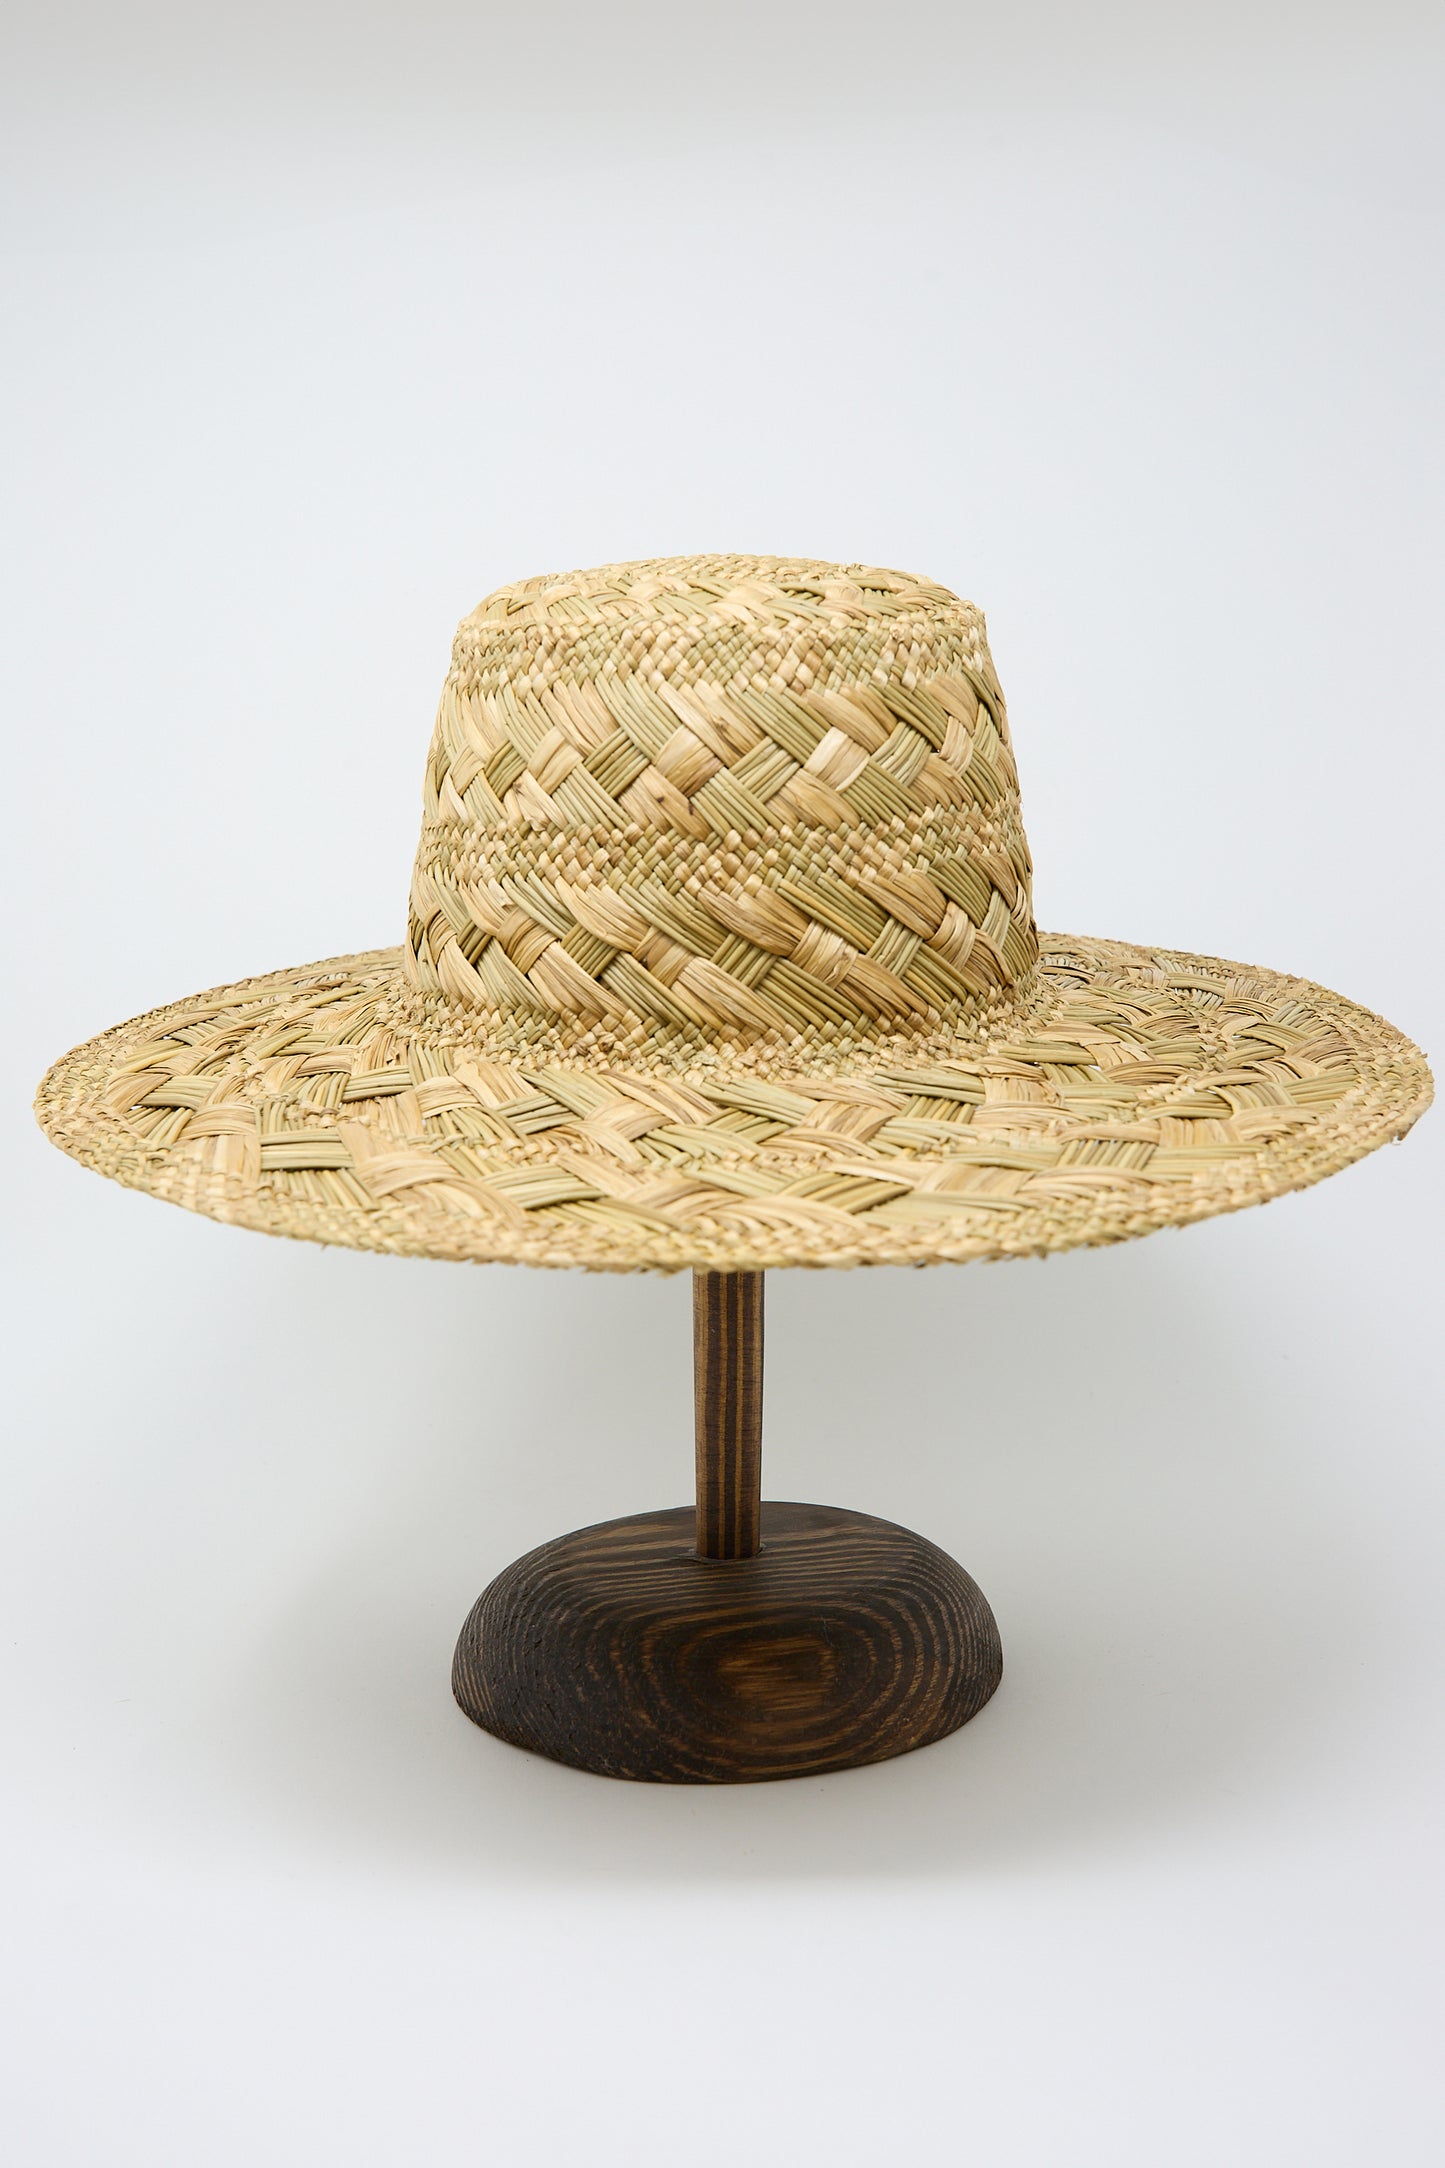 A wide-brimmed Treccia Lai Straw Hat in Natural displayed on a wooden stand against a plain white background by Reinhard Plank.